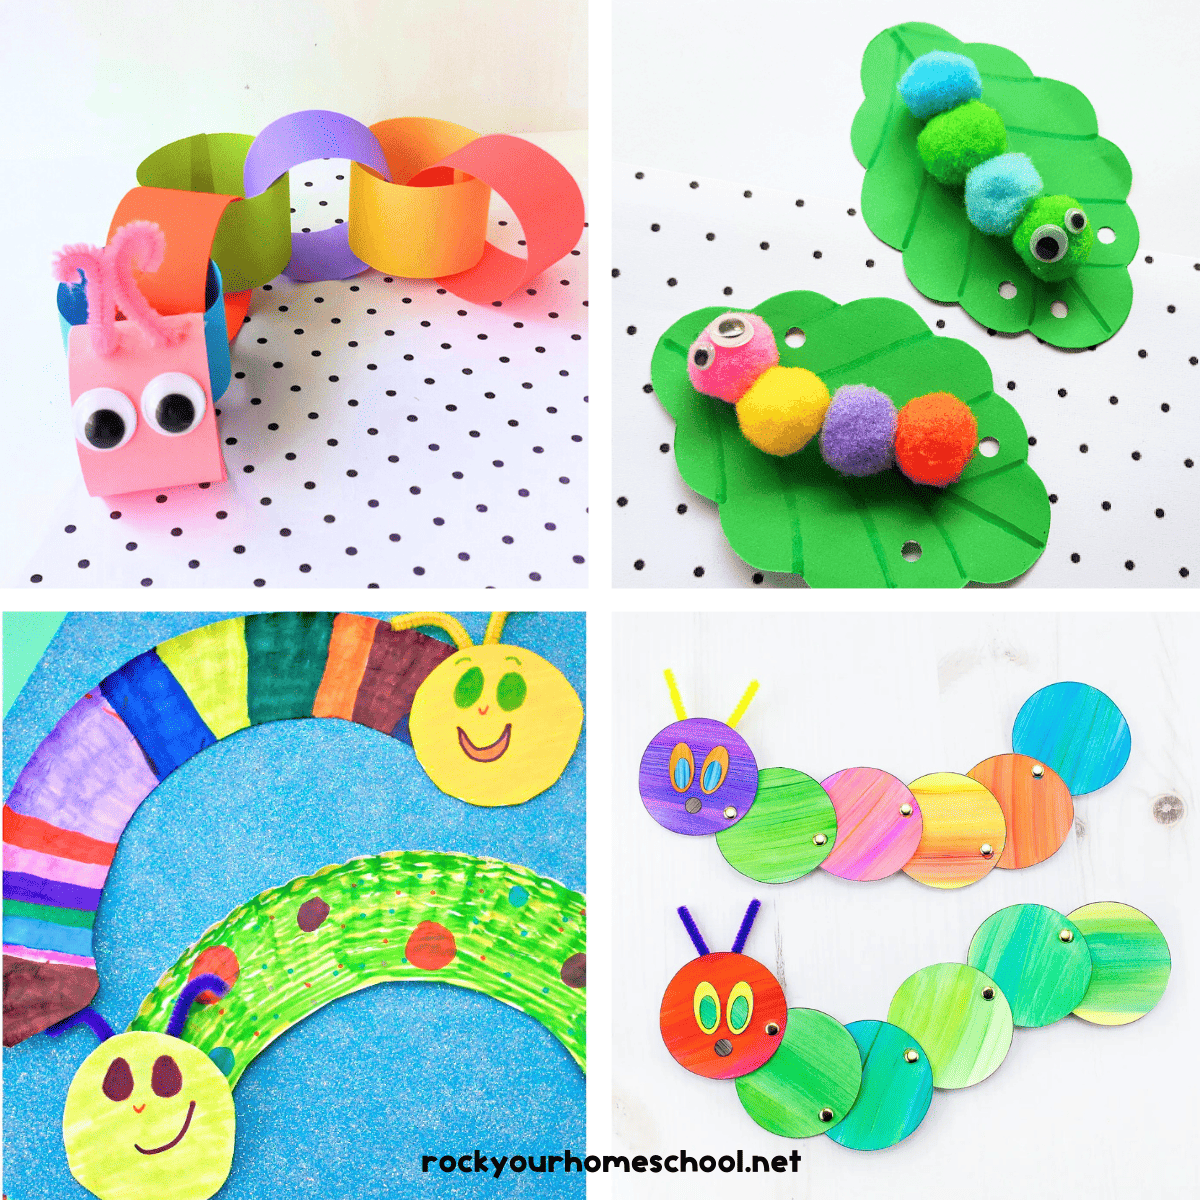 Four caterpillar crafts for kids including paper chain caterpillar, pop pom caterpillars, paper plate caterpillars, and interactive paper caterpillars.